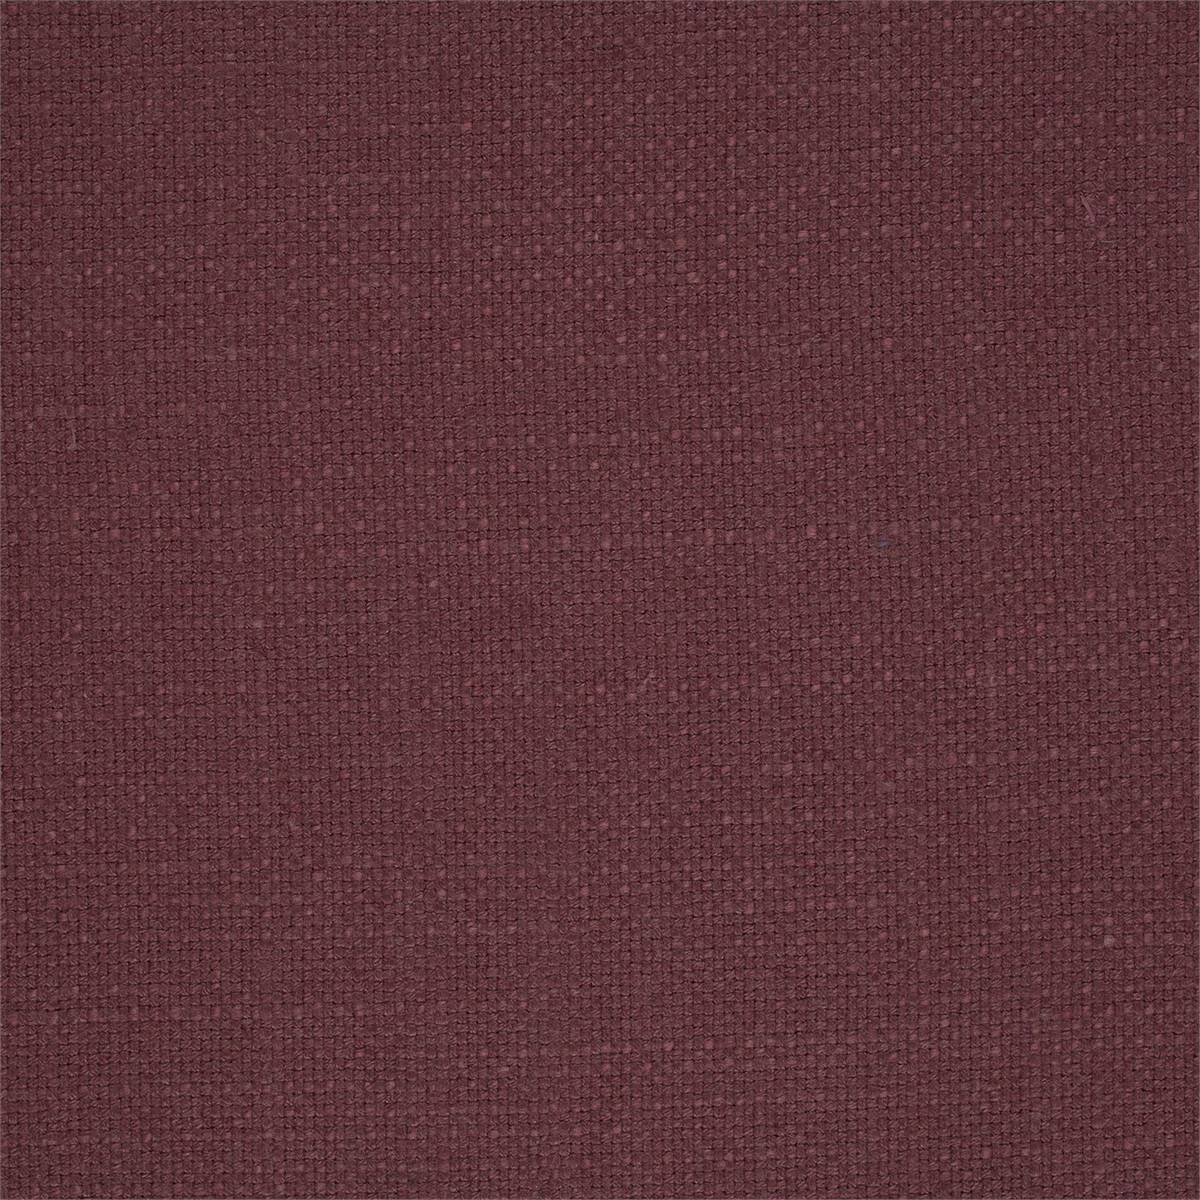 Tuscany Bordeaux Fabric by Sanderson